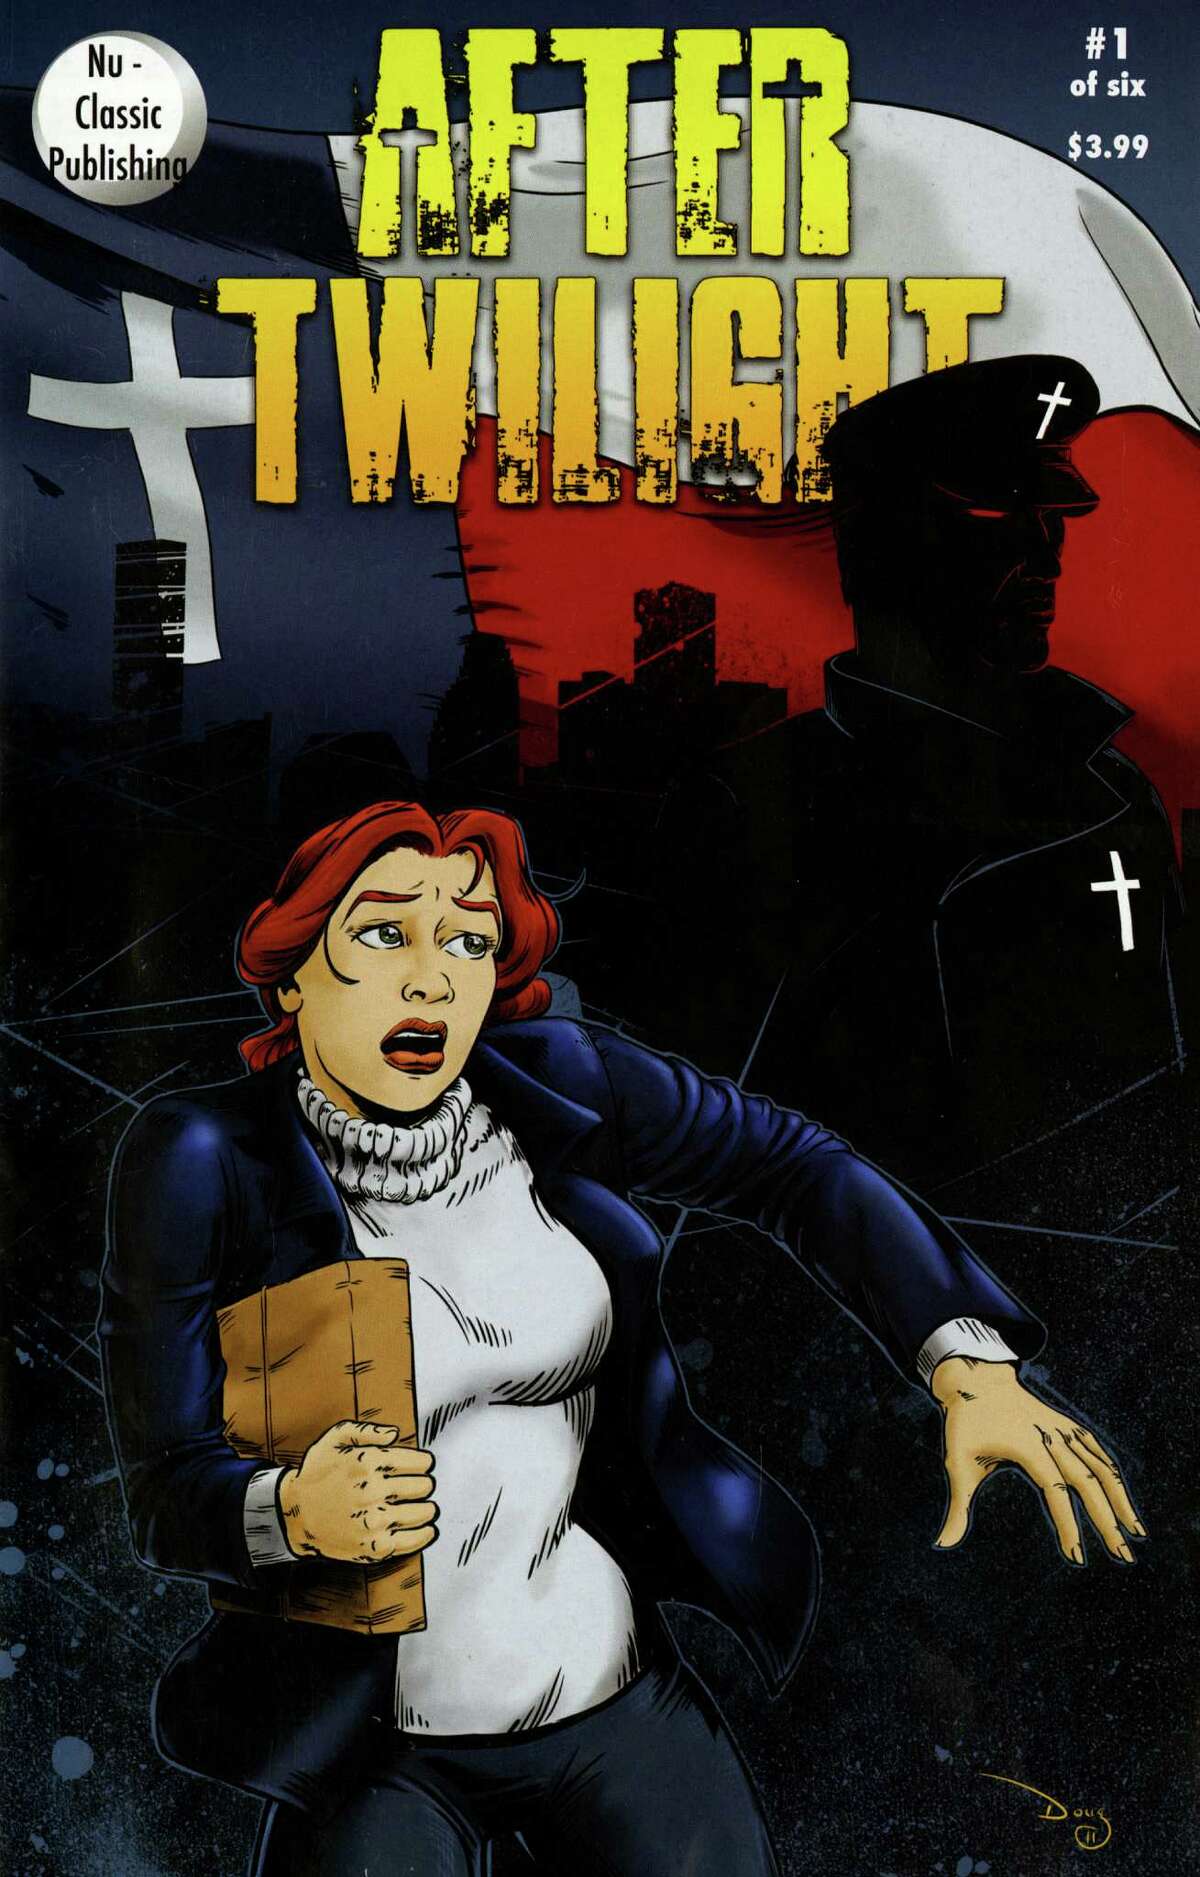 'After Twilight' Graphic Novel Series-Published By Nu-Classic Publishing, Houston Tx